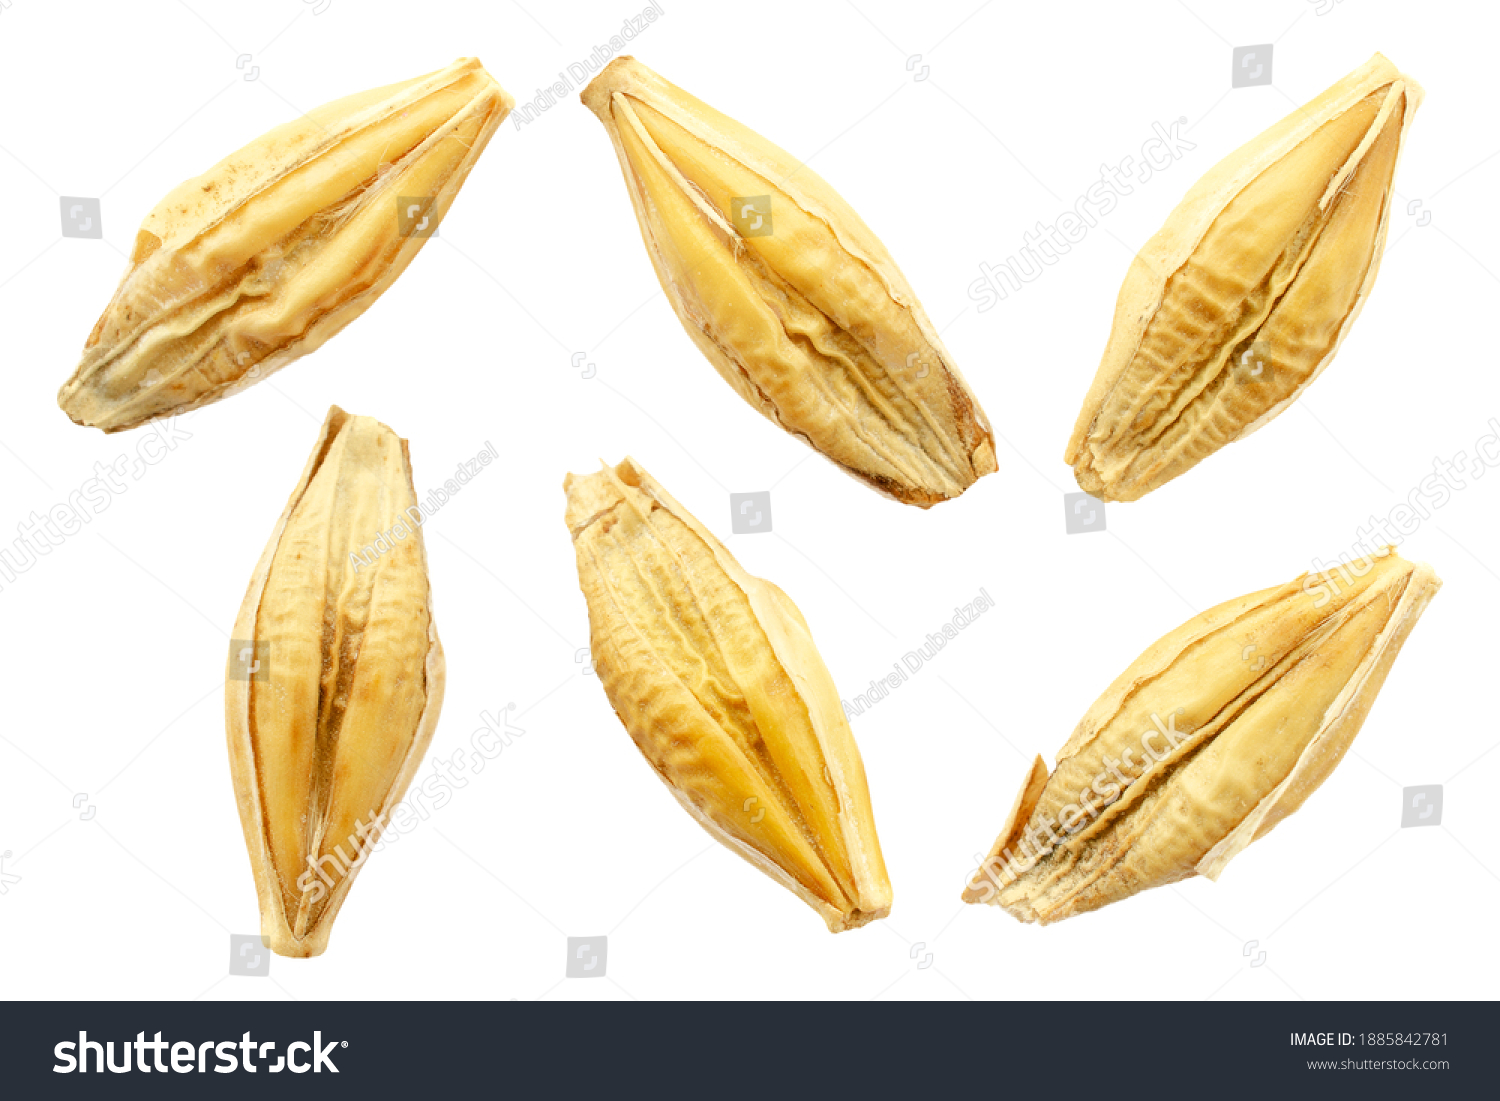 Barley seeds are isolated on white, top view, macro. Barley seeds isolated on a white background. Grains of barley malt on a white background. Set of barley grains isolated on white background. #1885842781